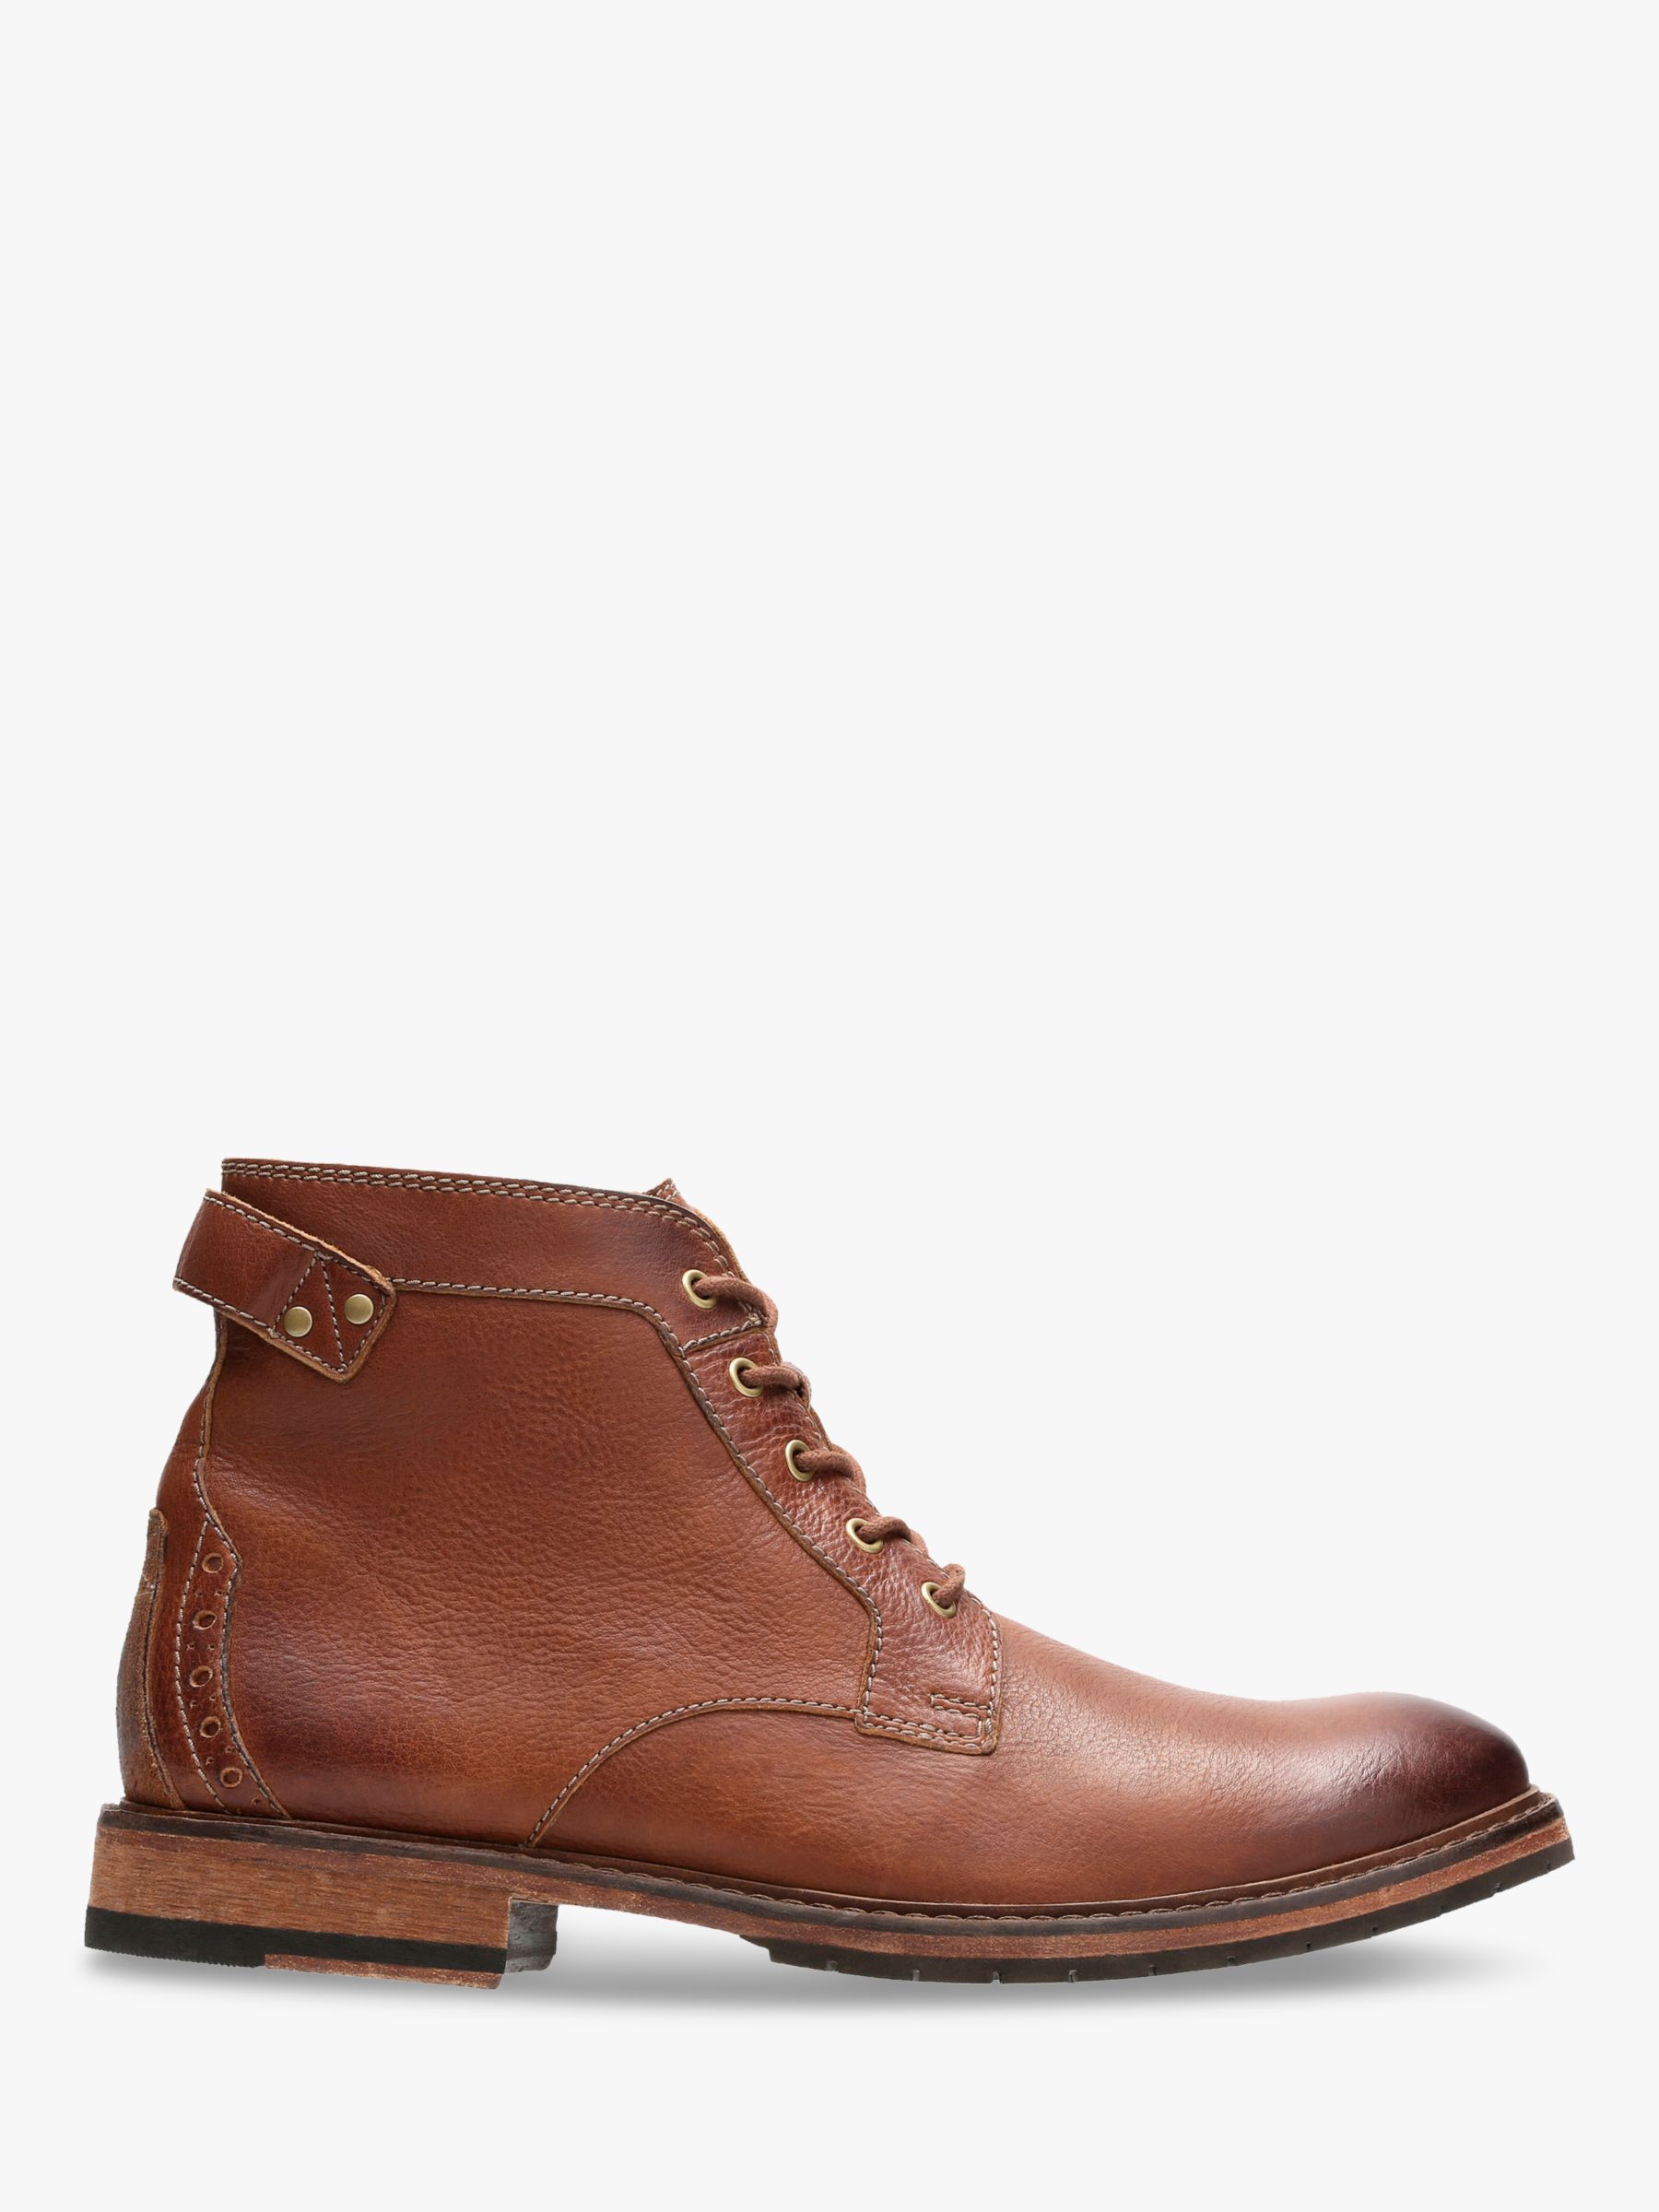 Clarks Clarkdale Bud Leather Boots, Dark Tan at John Lewis & Partners